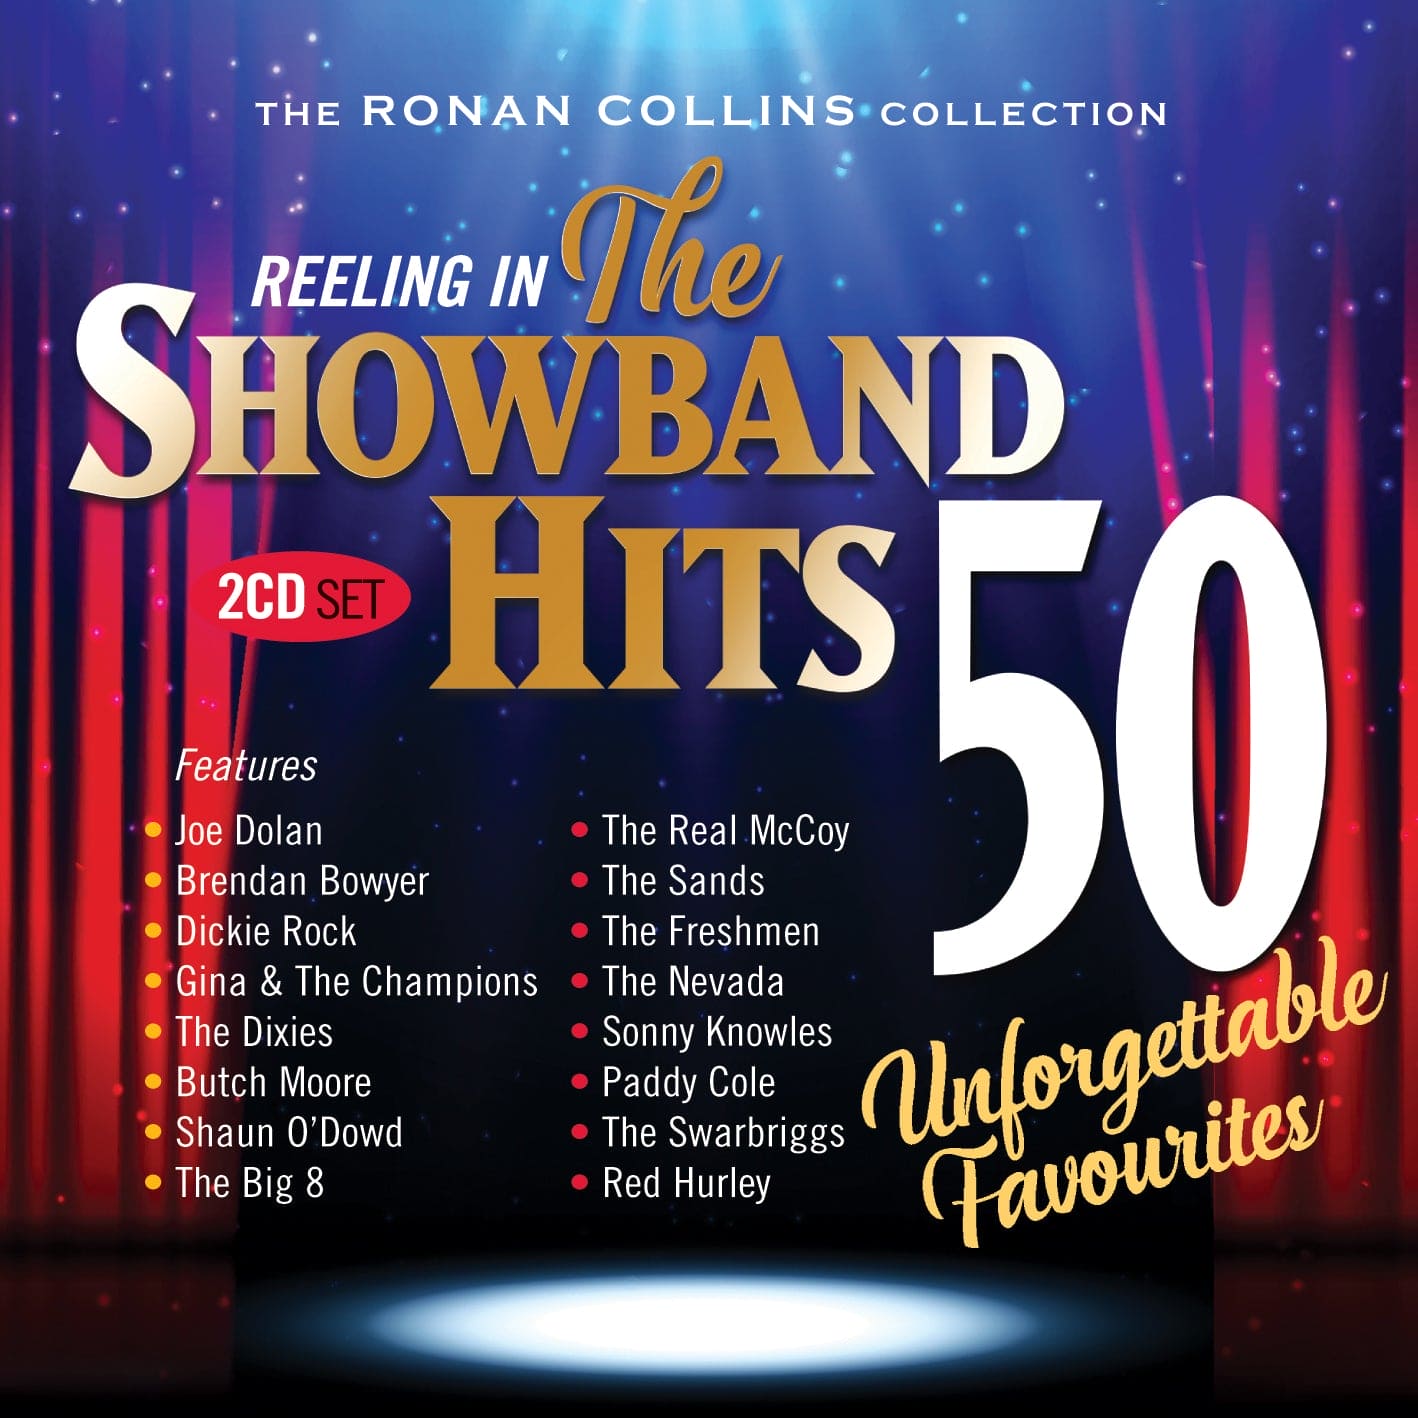 Reeling In The Showband Hits - The Ronan Collins Collection - Various Artists [2CD]